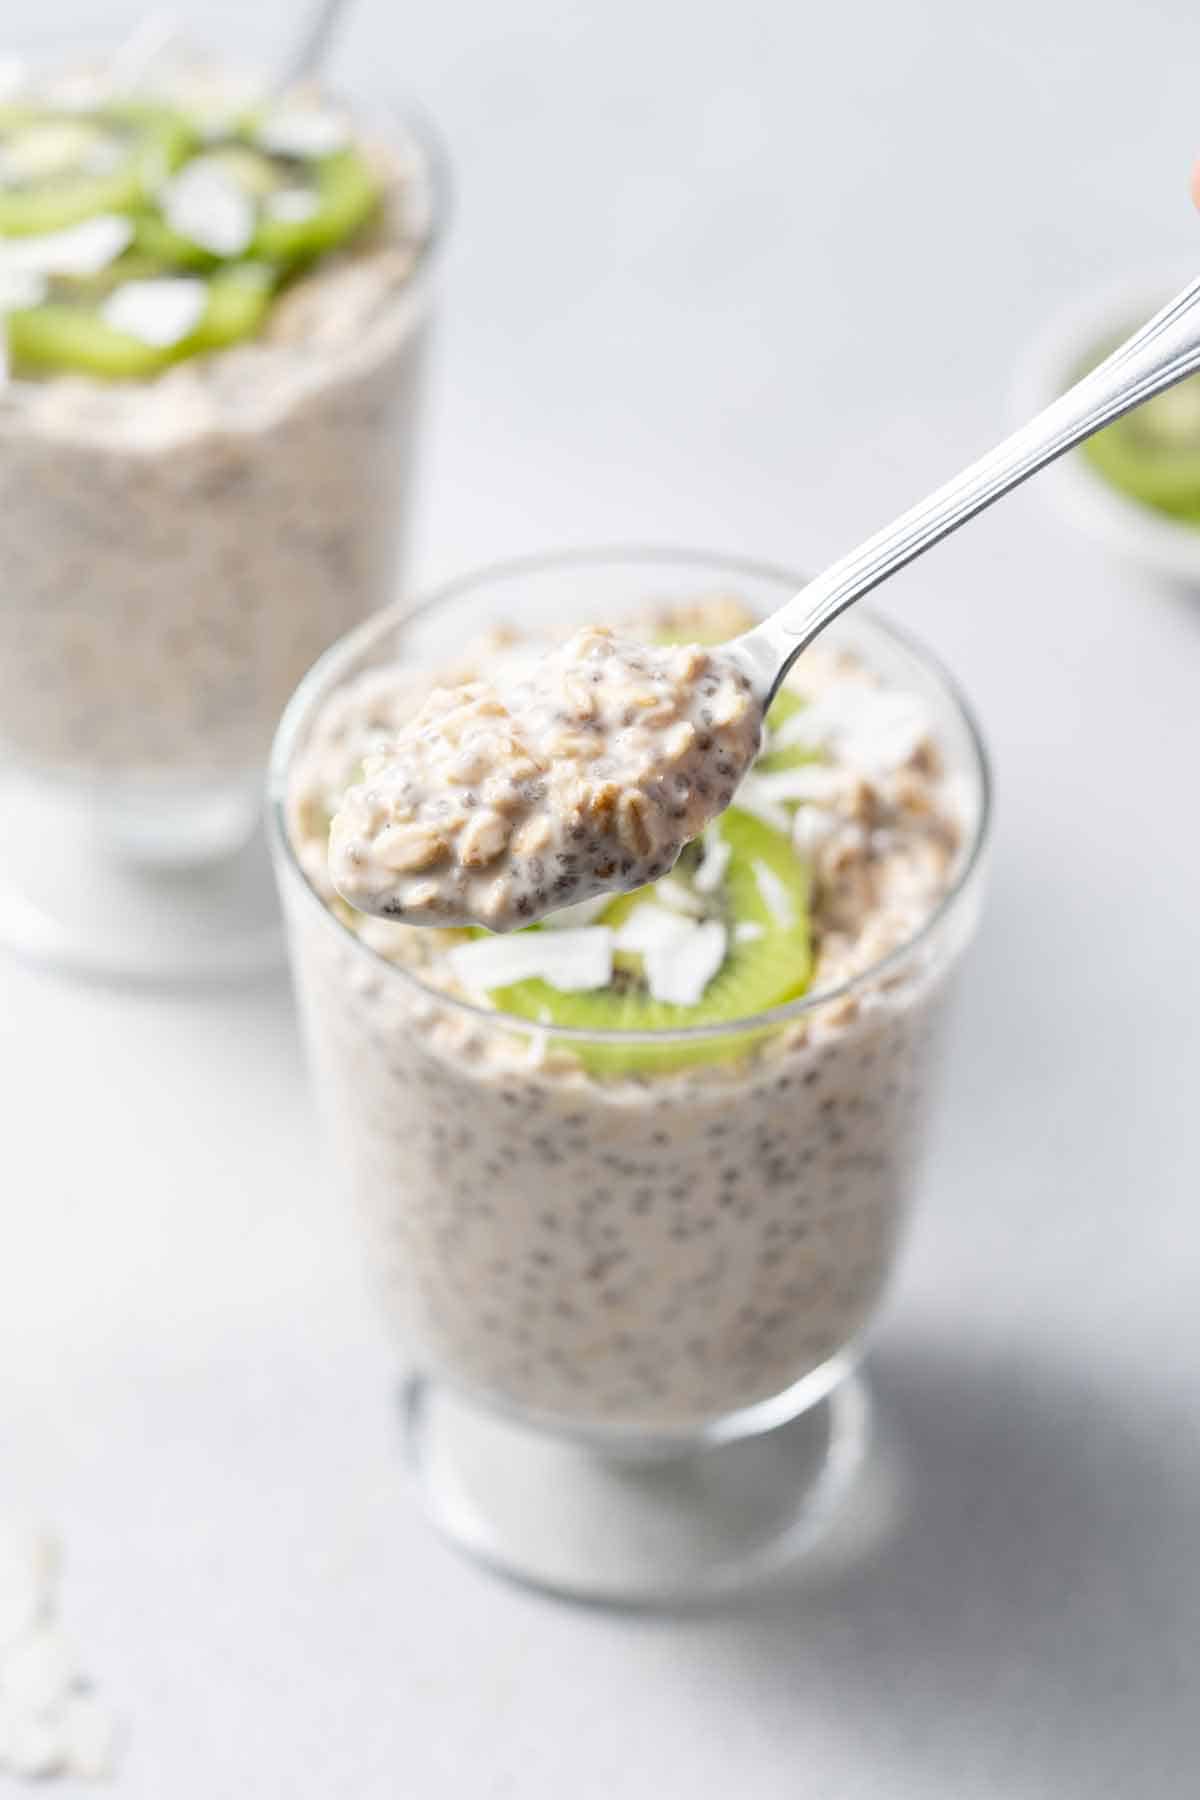 A spoonful of coconut overnight oats.